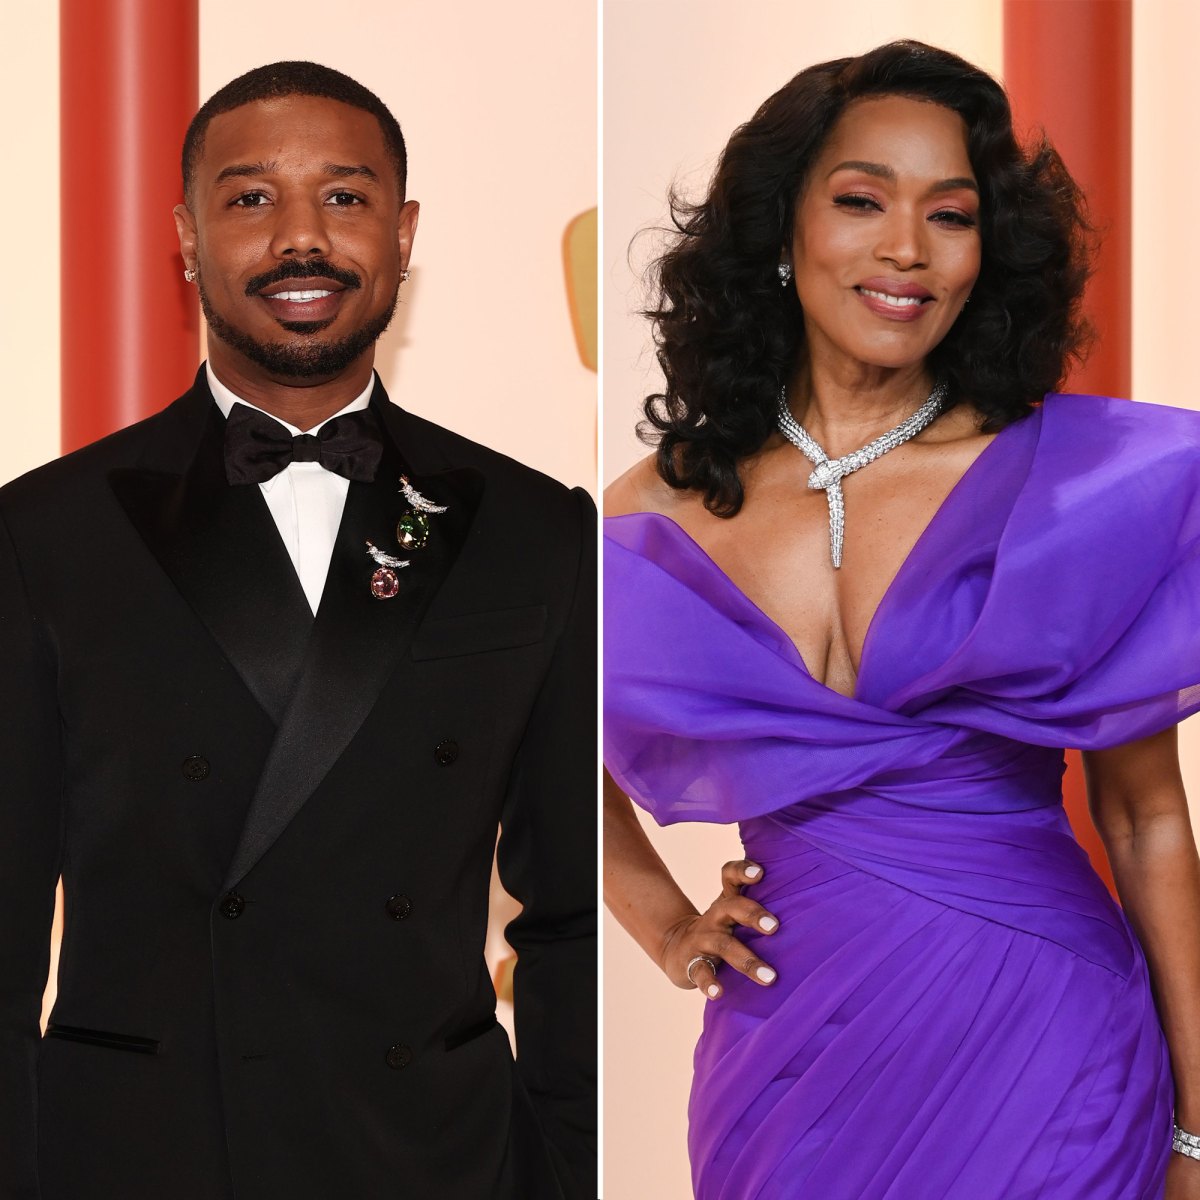 Oscars 2023: Angela Bassett receives shout-out from Michael B